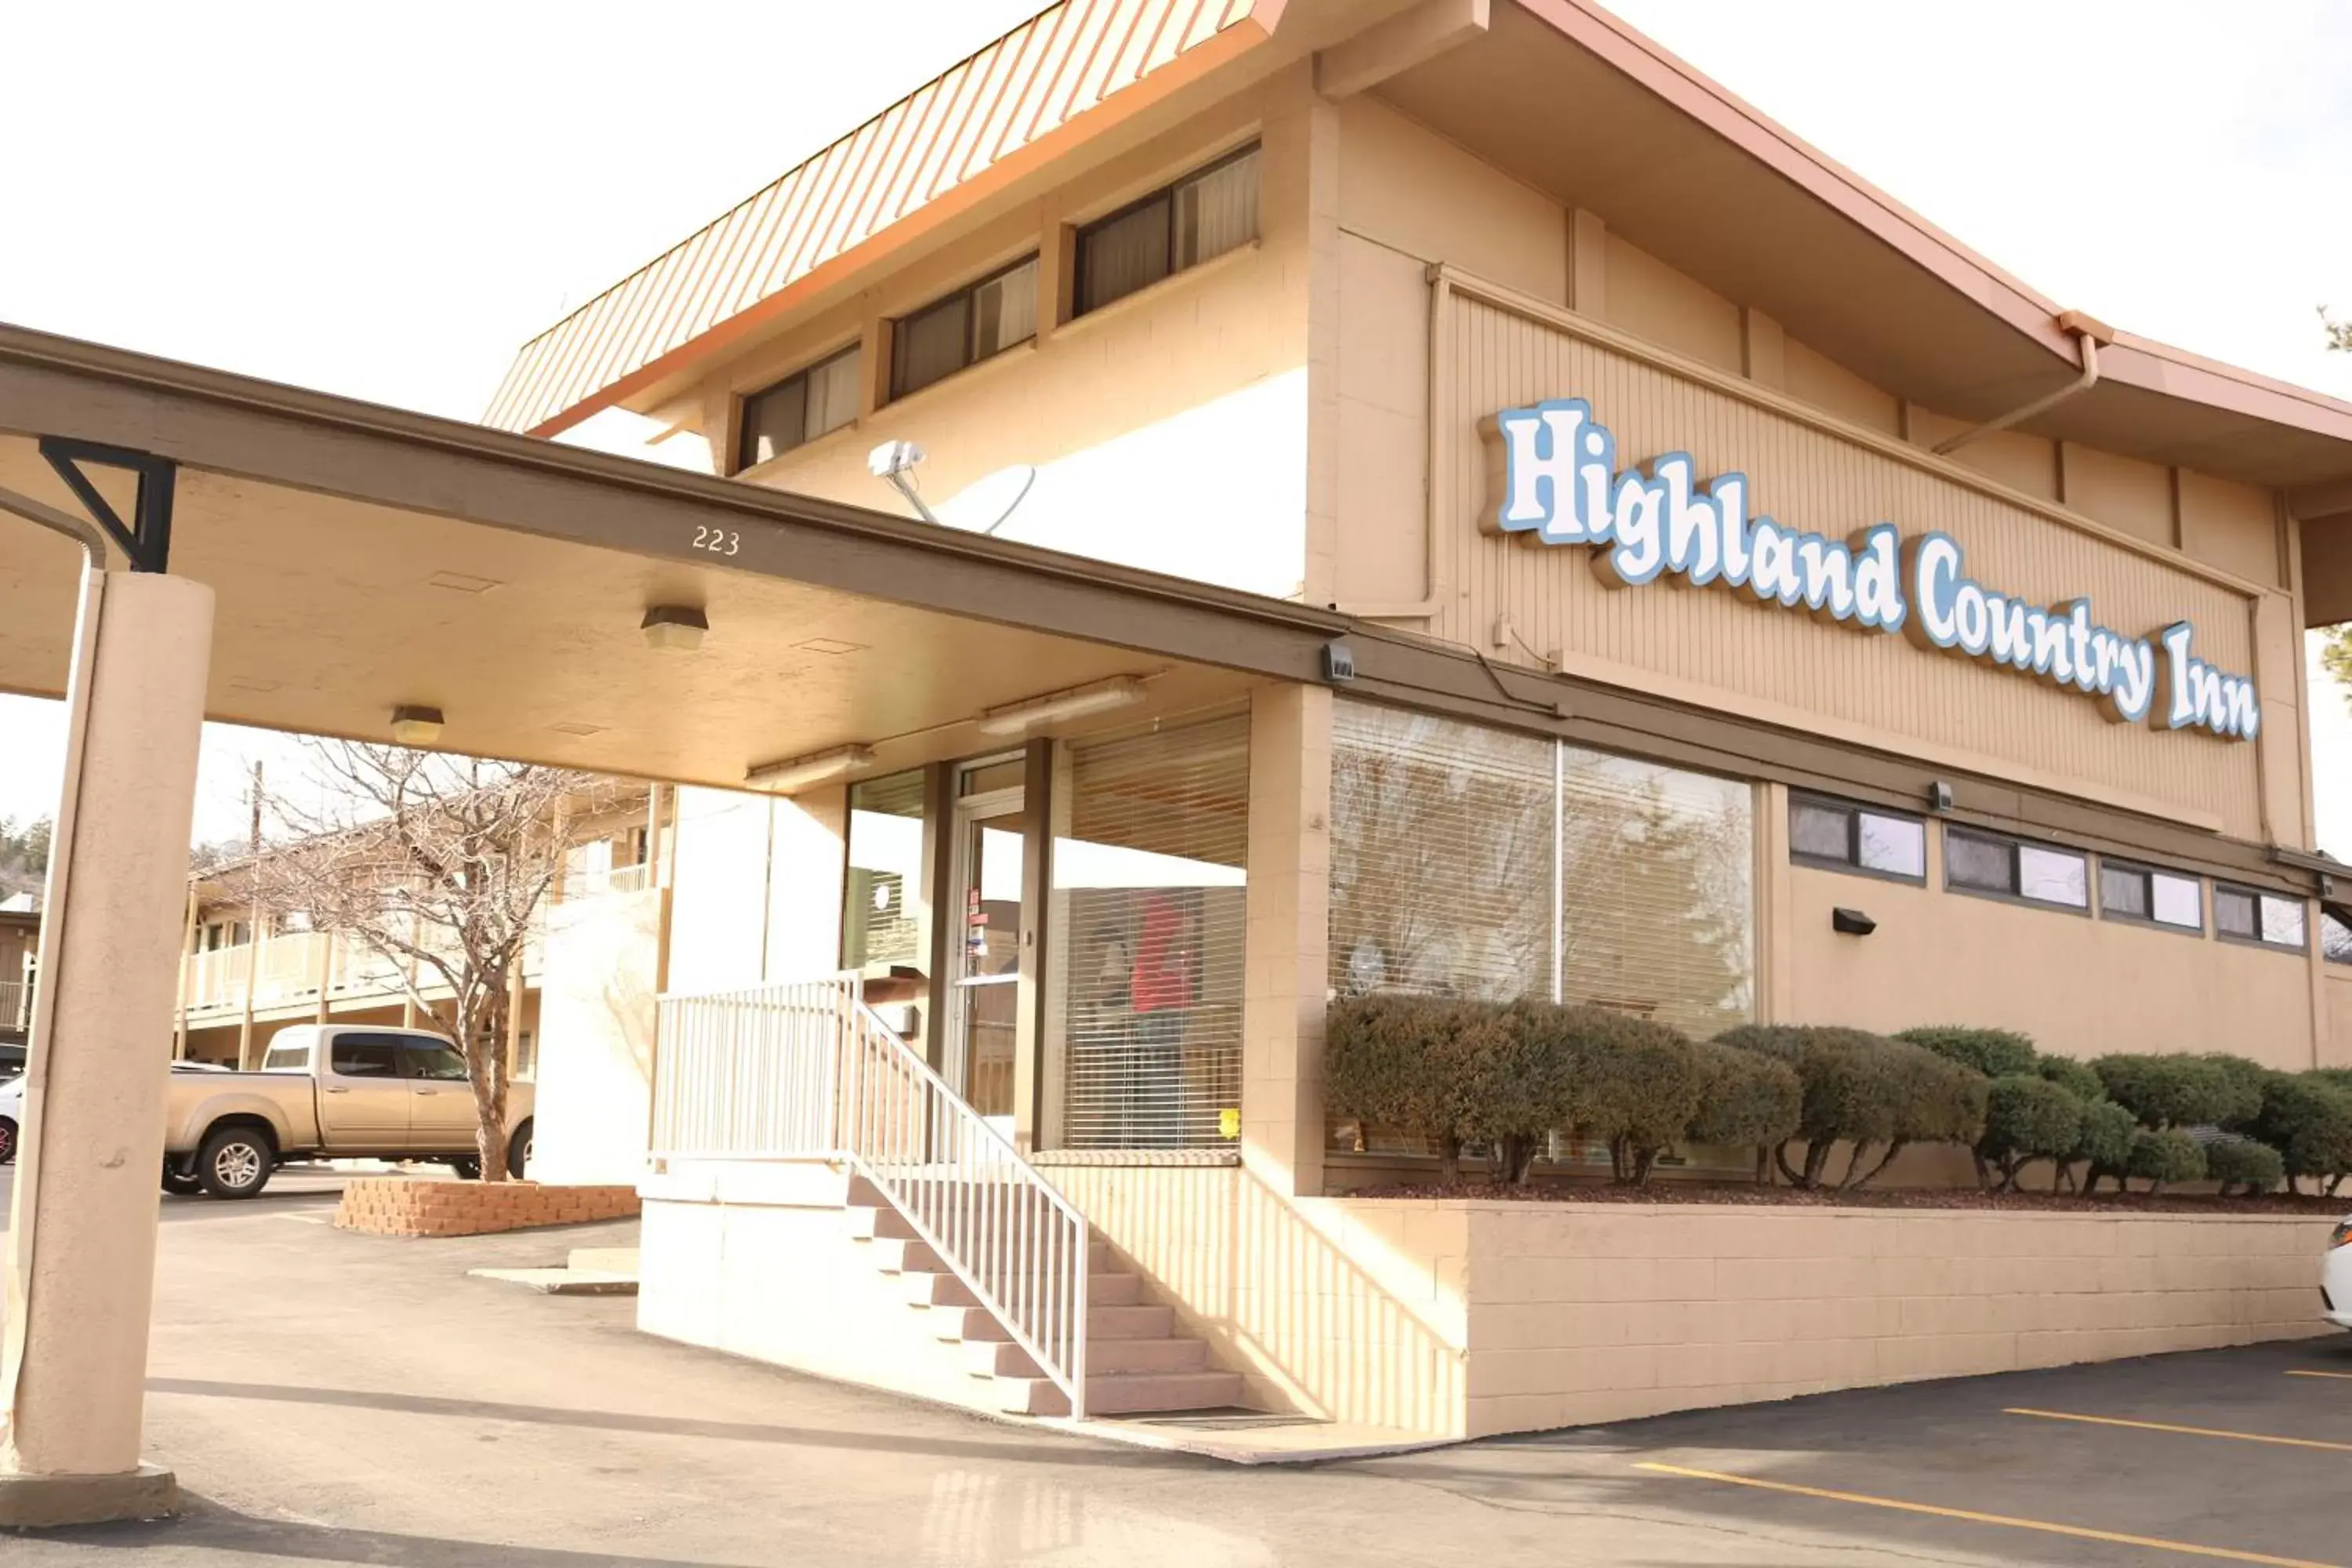 Property Building in Highland Country Inn Flagstaff